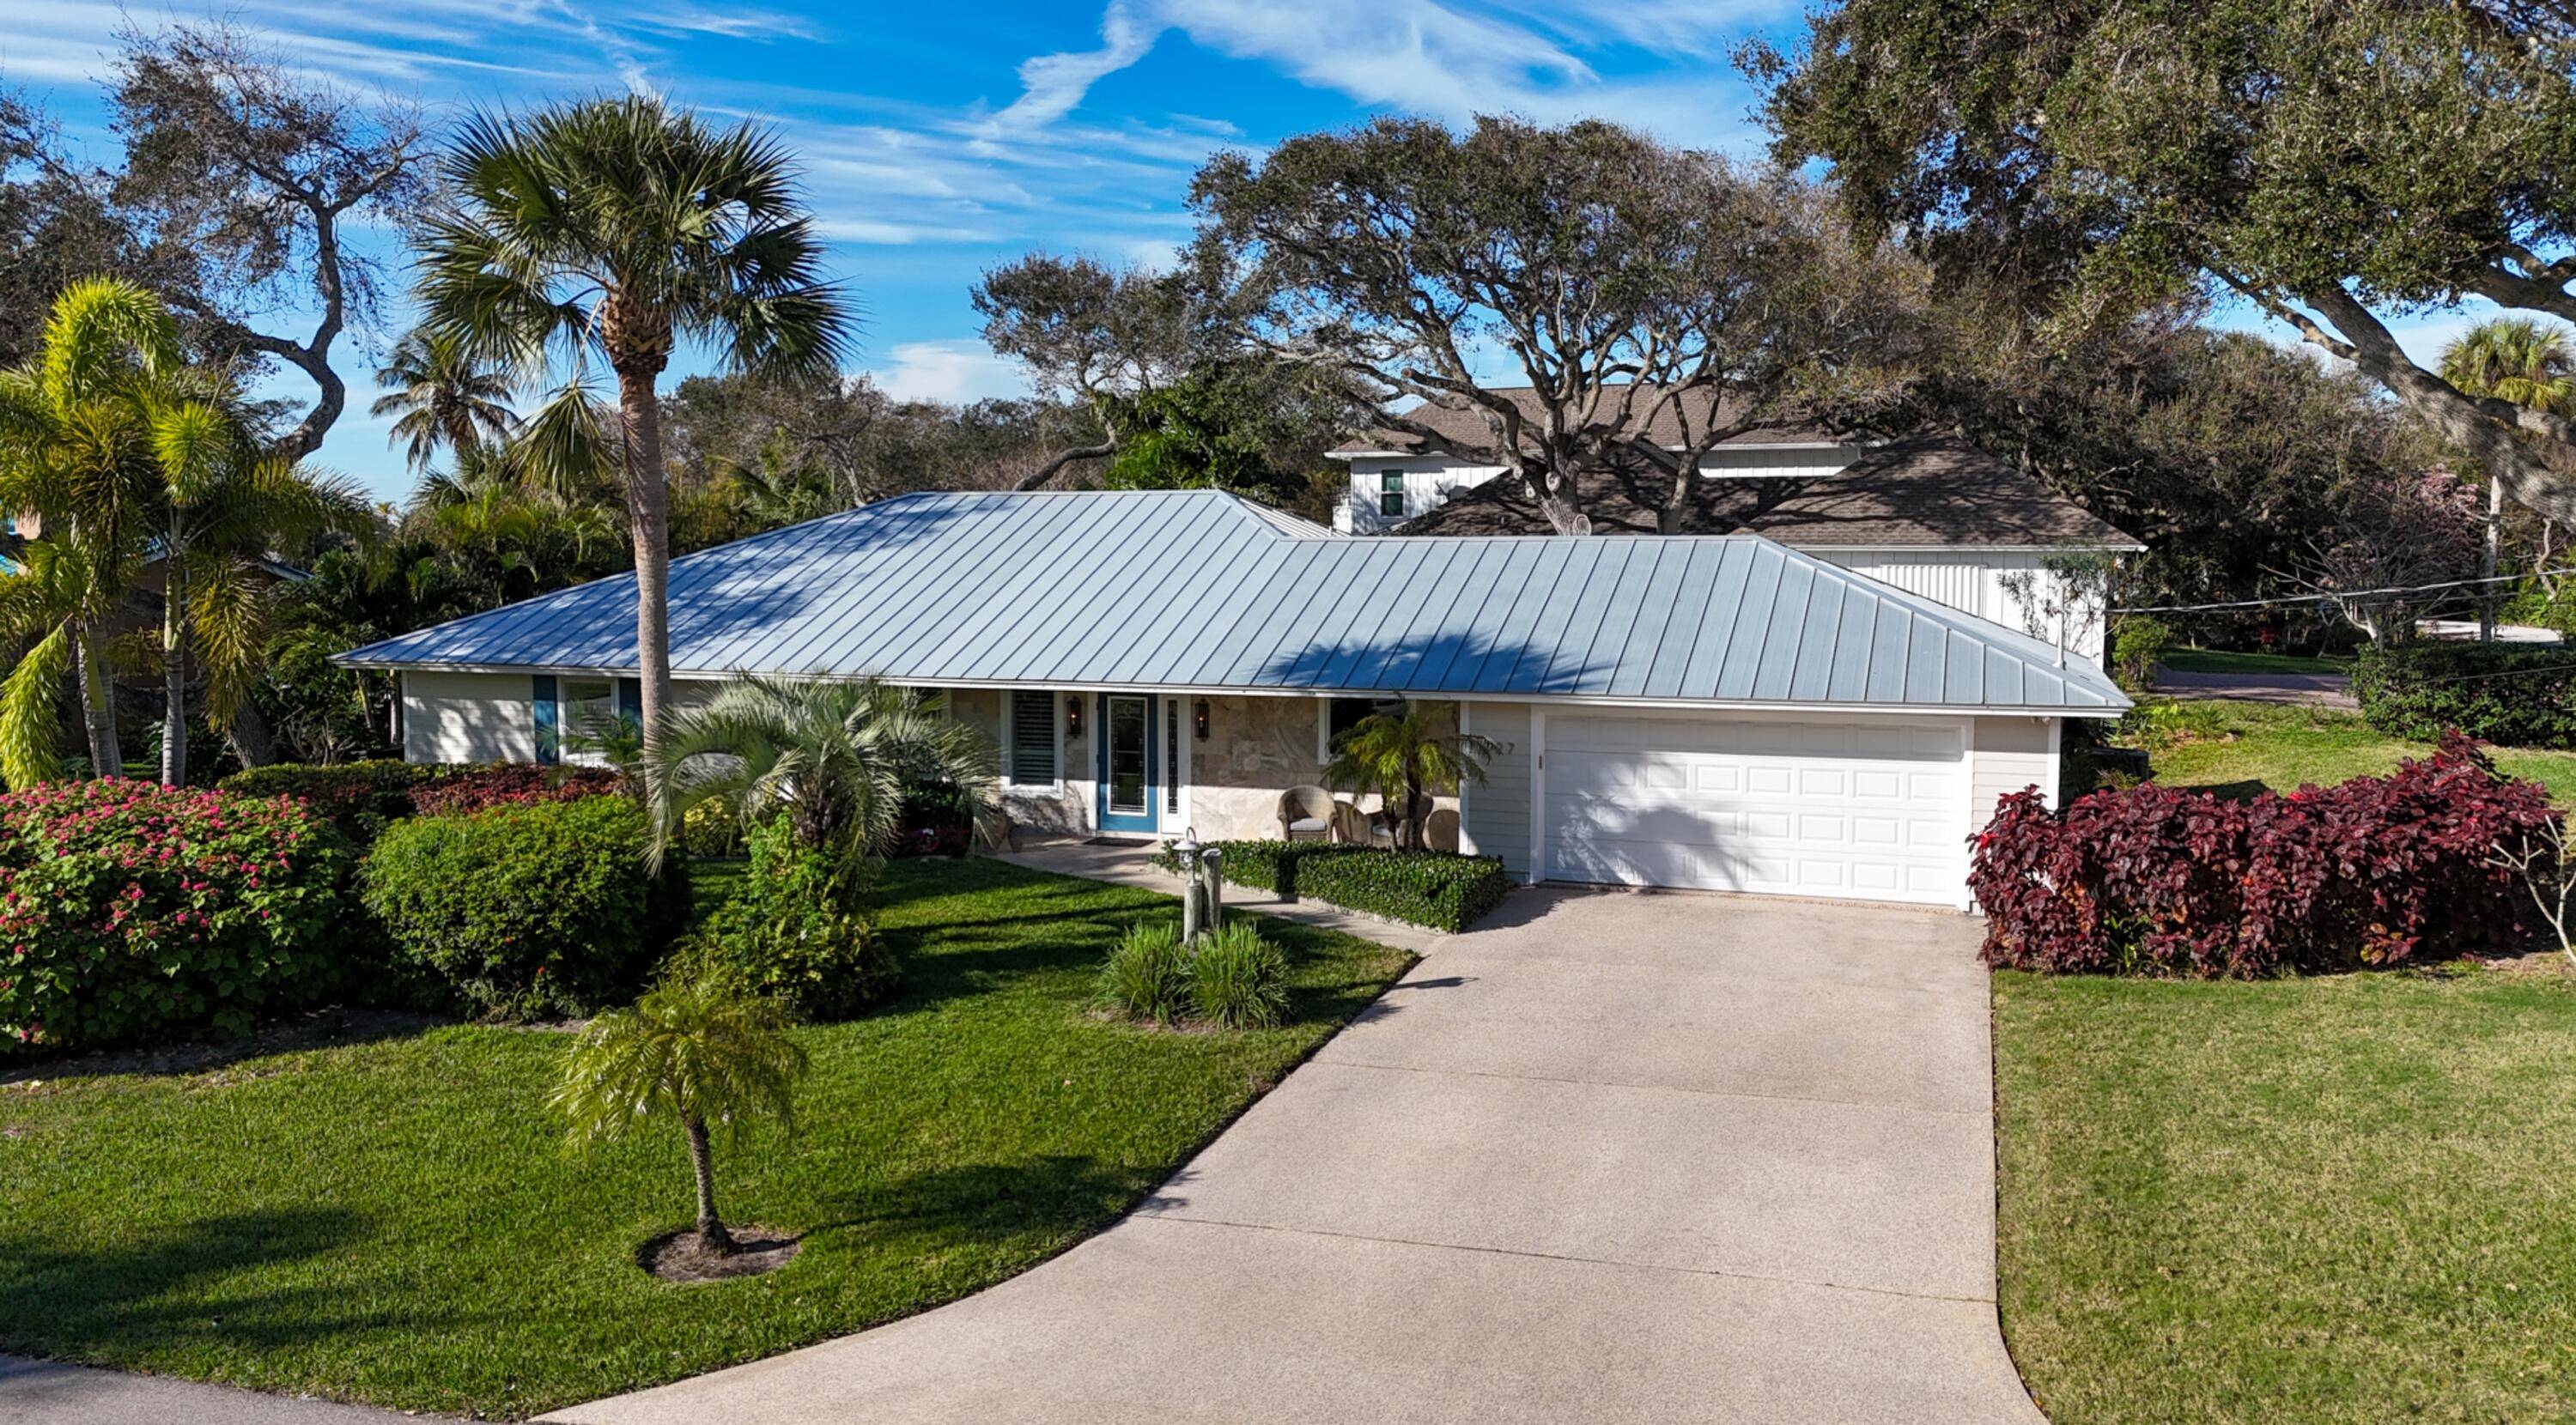 A true Beach River retreat, this natural light filled three bedroom, three bathroom residence offers 2, 080 square feet of coastal living space, poised on a manicured.